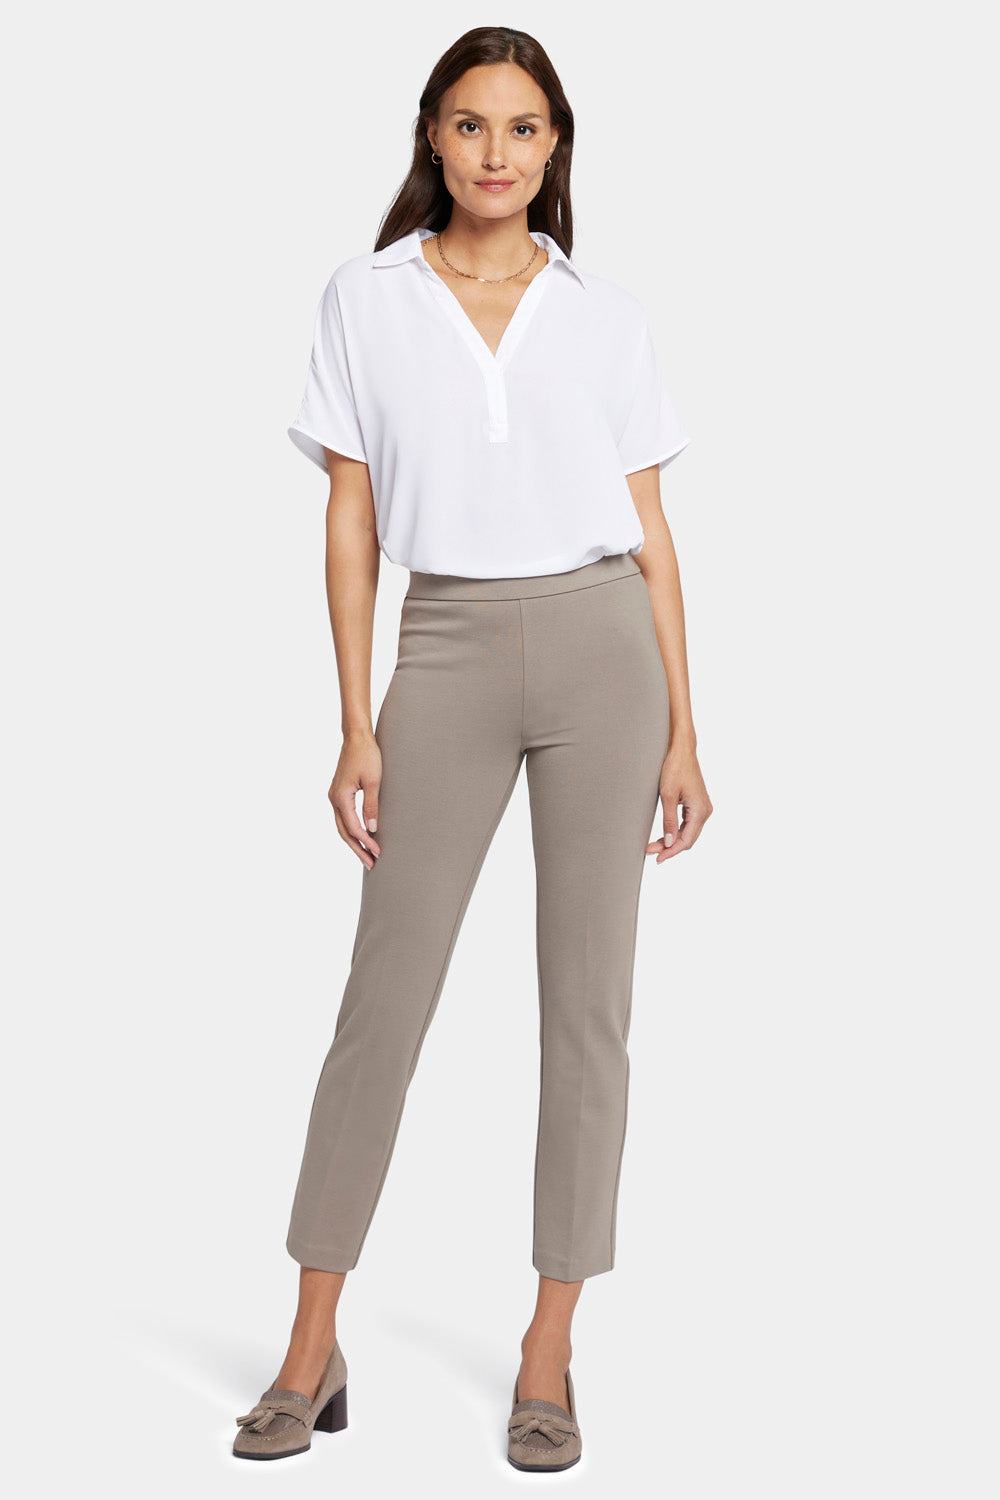 Pull-On Flared Ankle Trouser Pants Sculpt-Her™ Collection - Saddlewood Tan